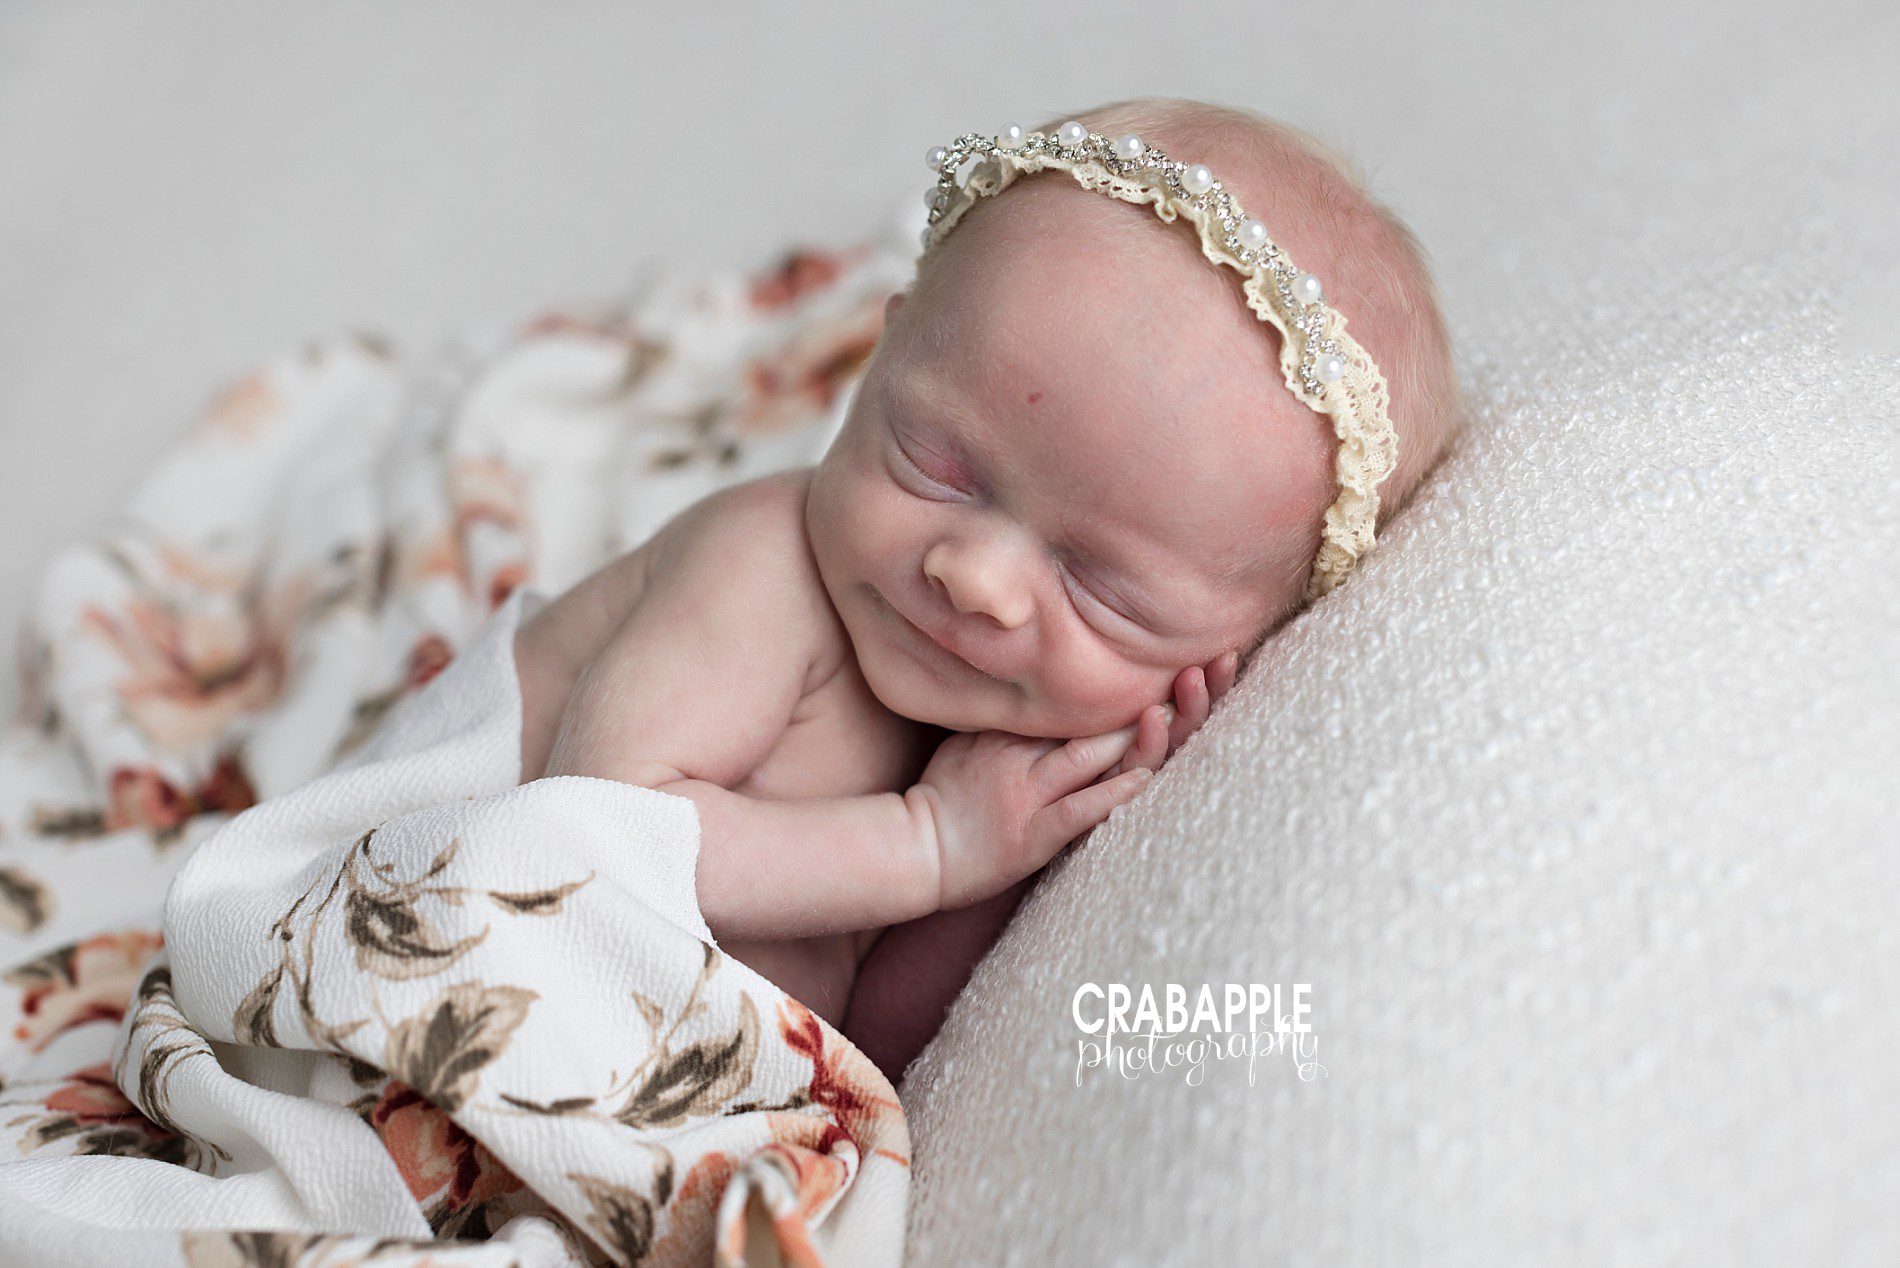 Using dainty headbands and floral blankets in newborn baby girl photos.